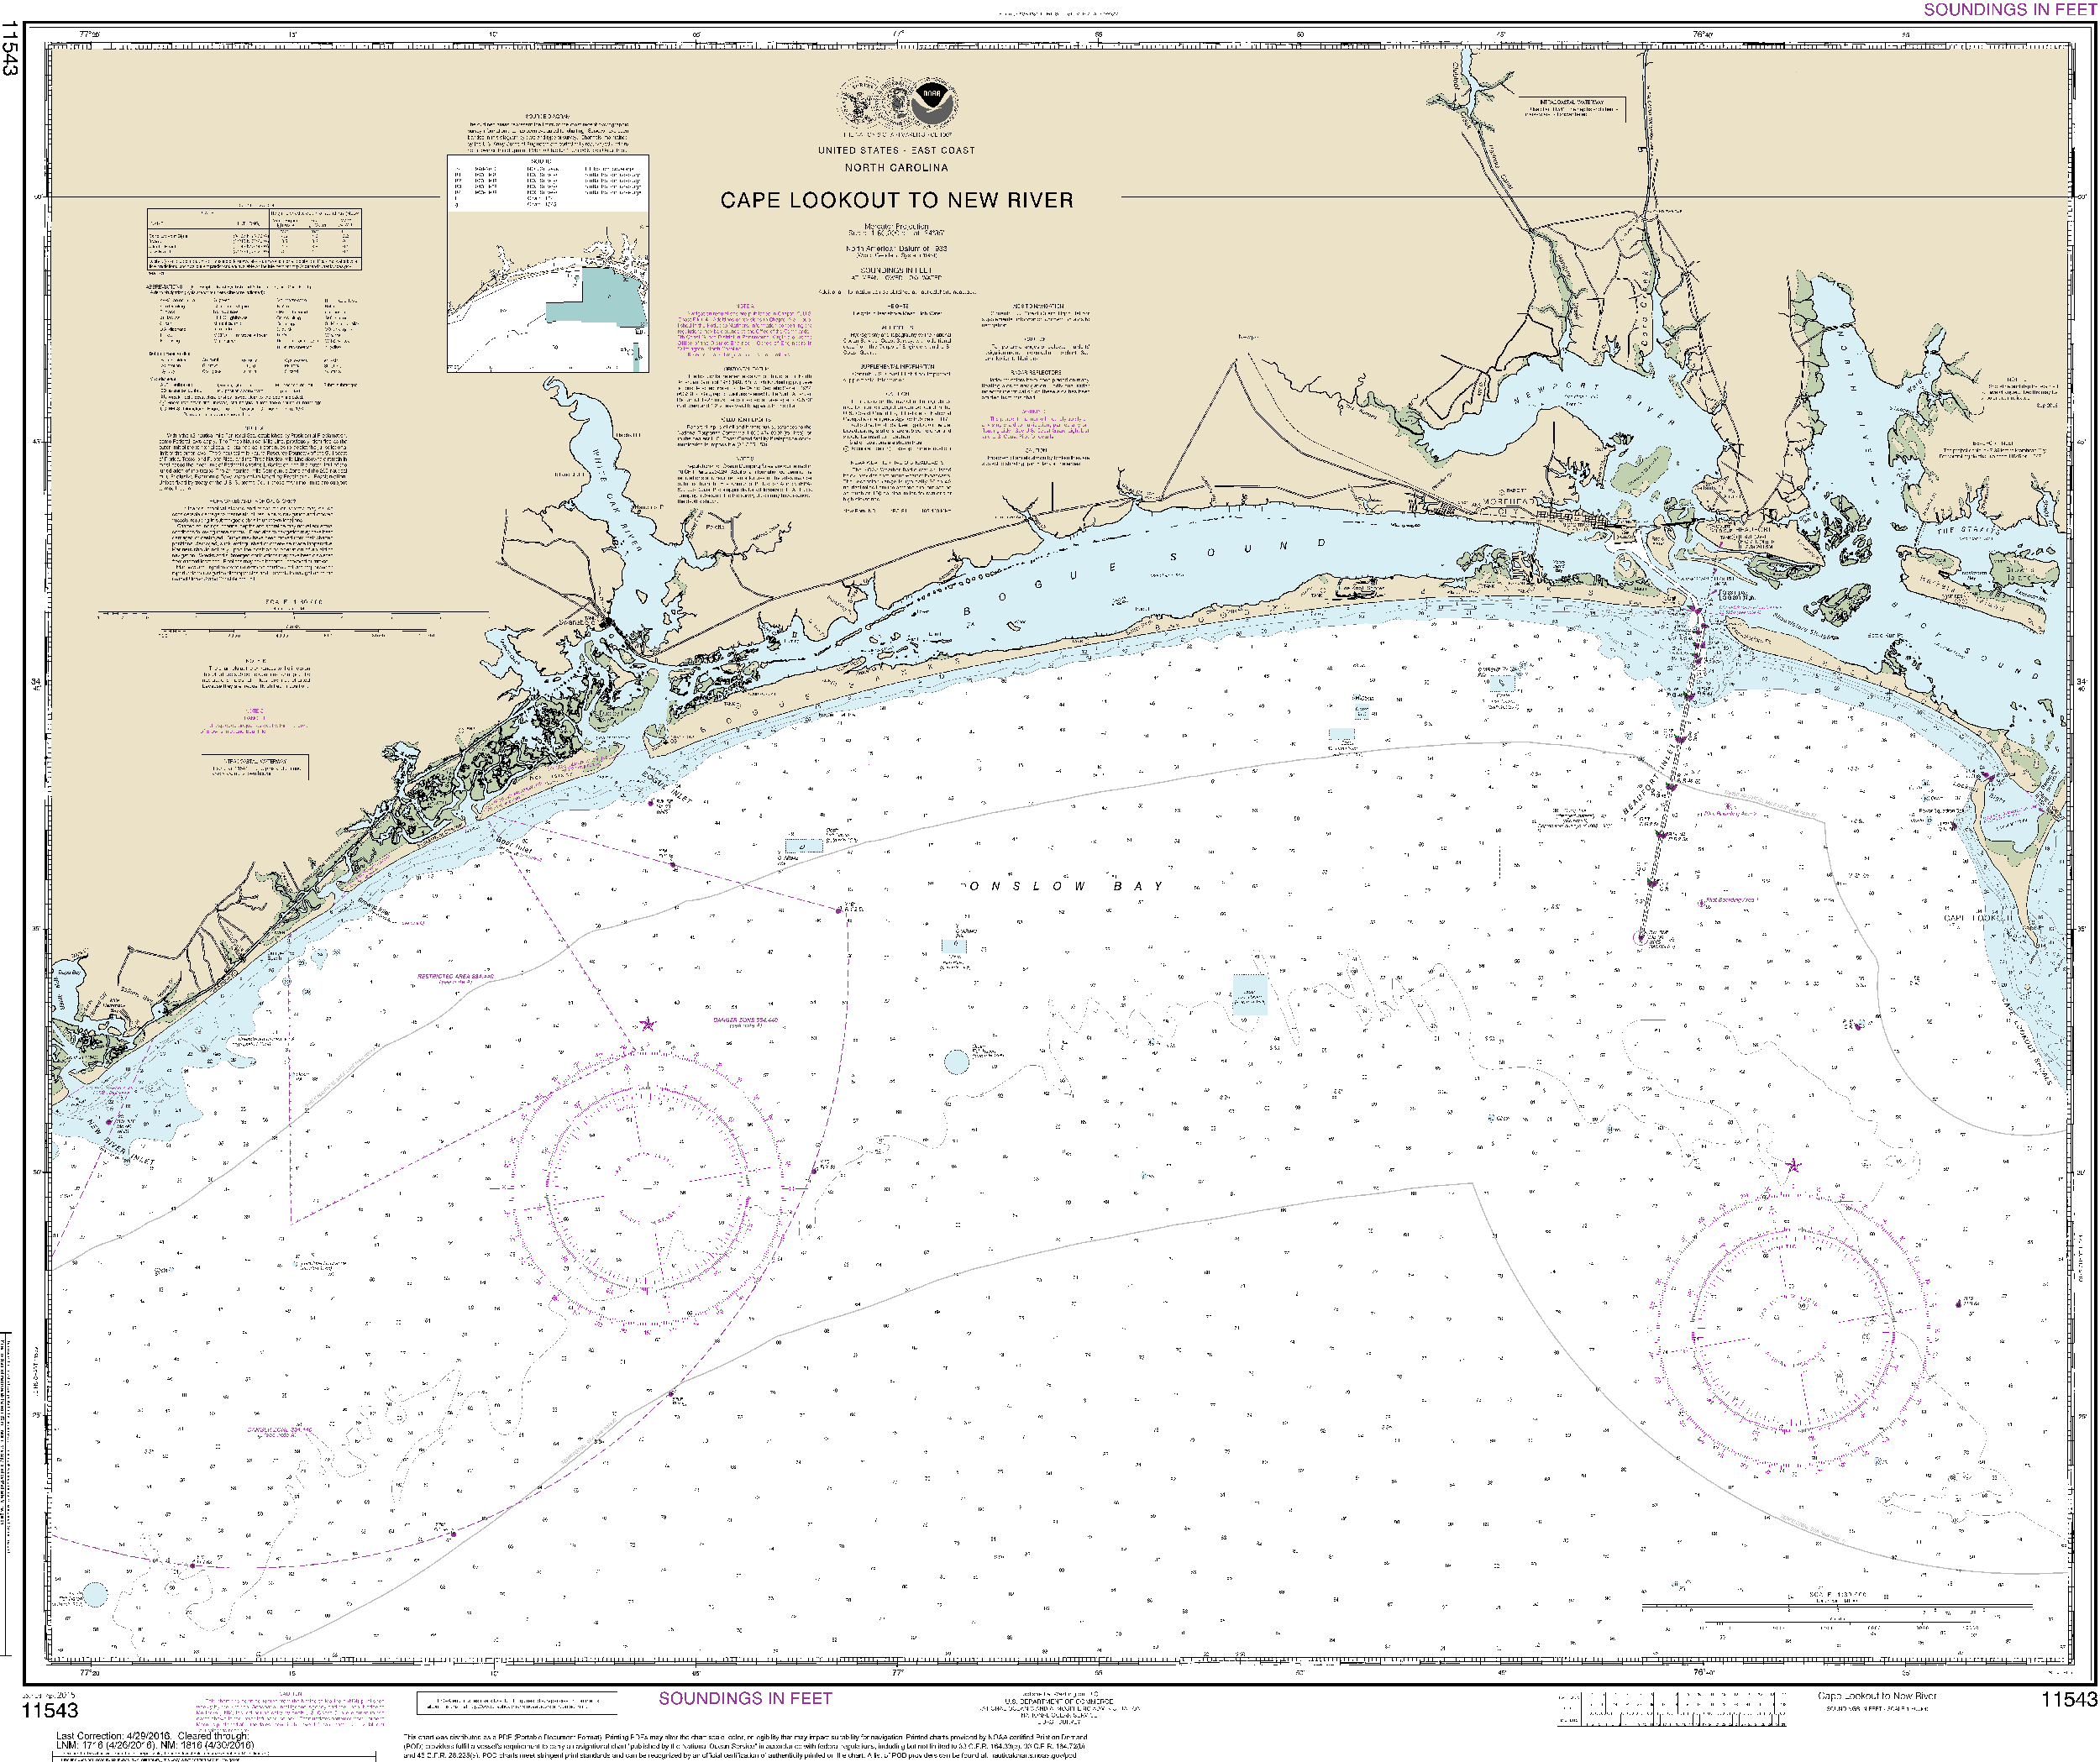 NOAA Nautical Chart 11543: Cape Lookout to New River